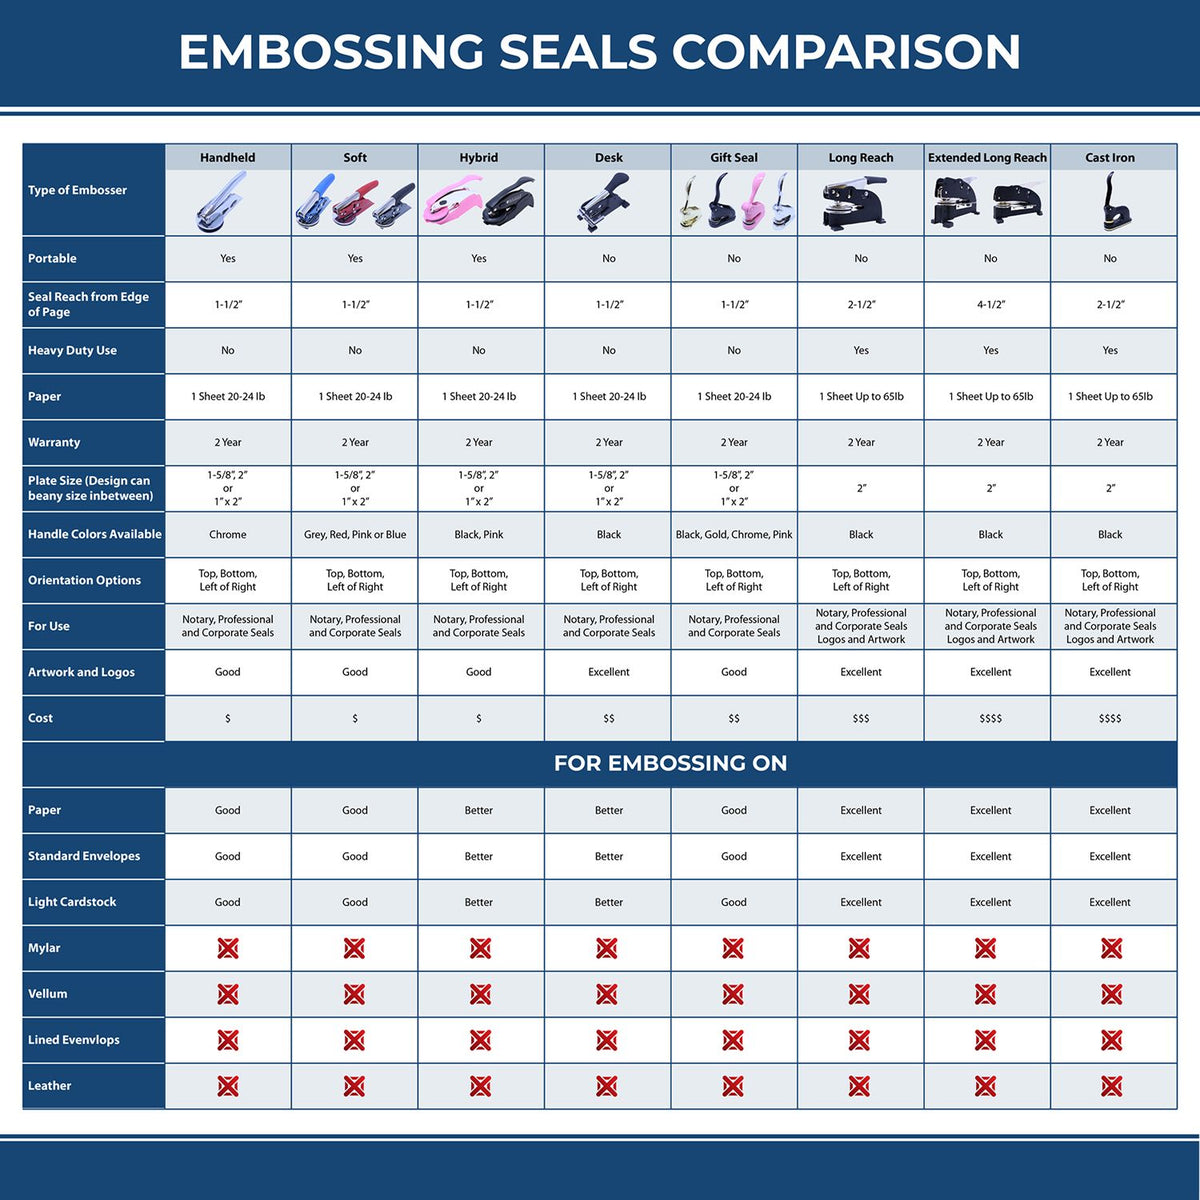 A comparison chart for the different types of mount models available for the Hybrid Vermont Architect Seal